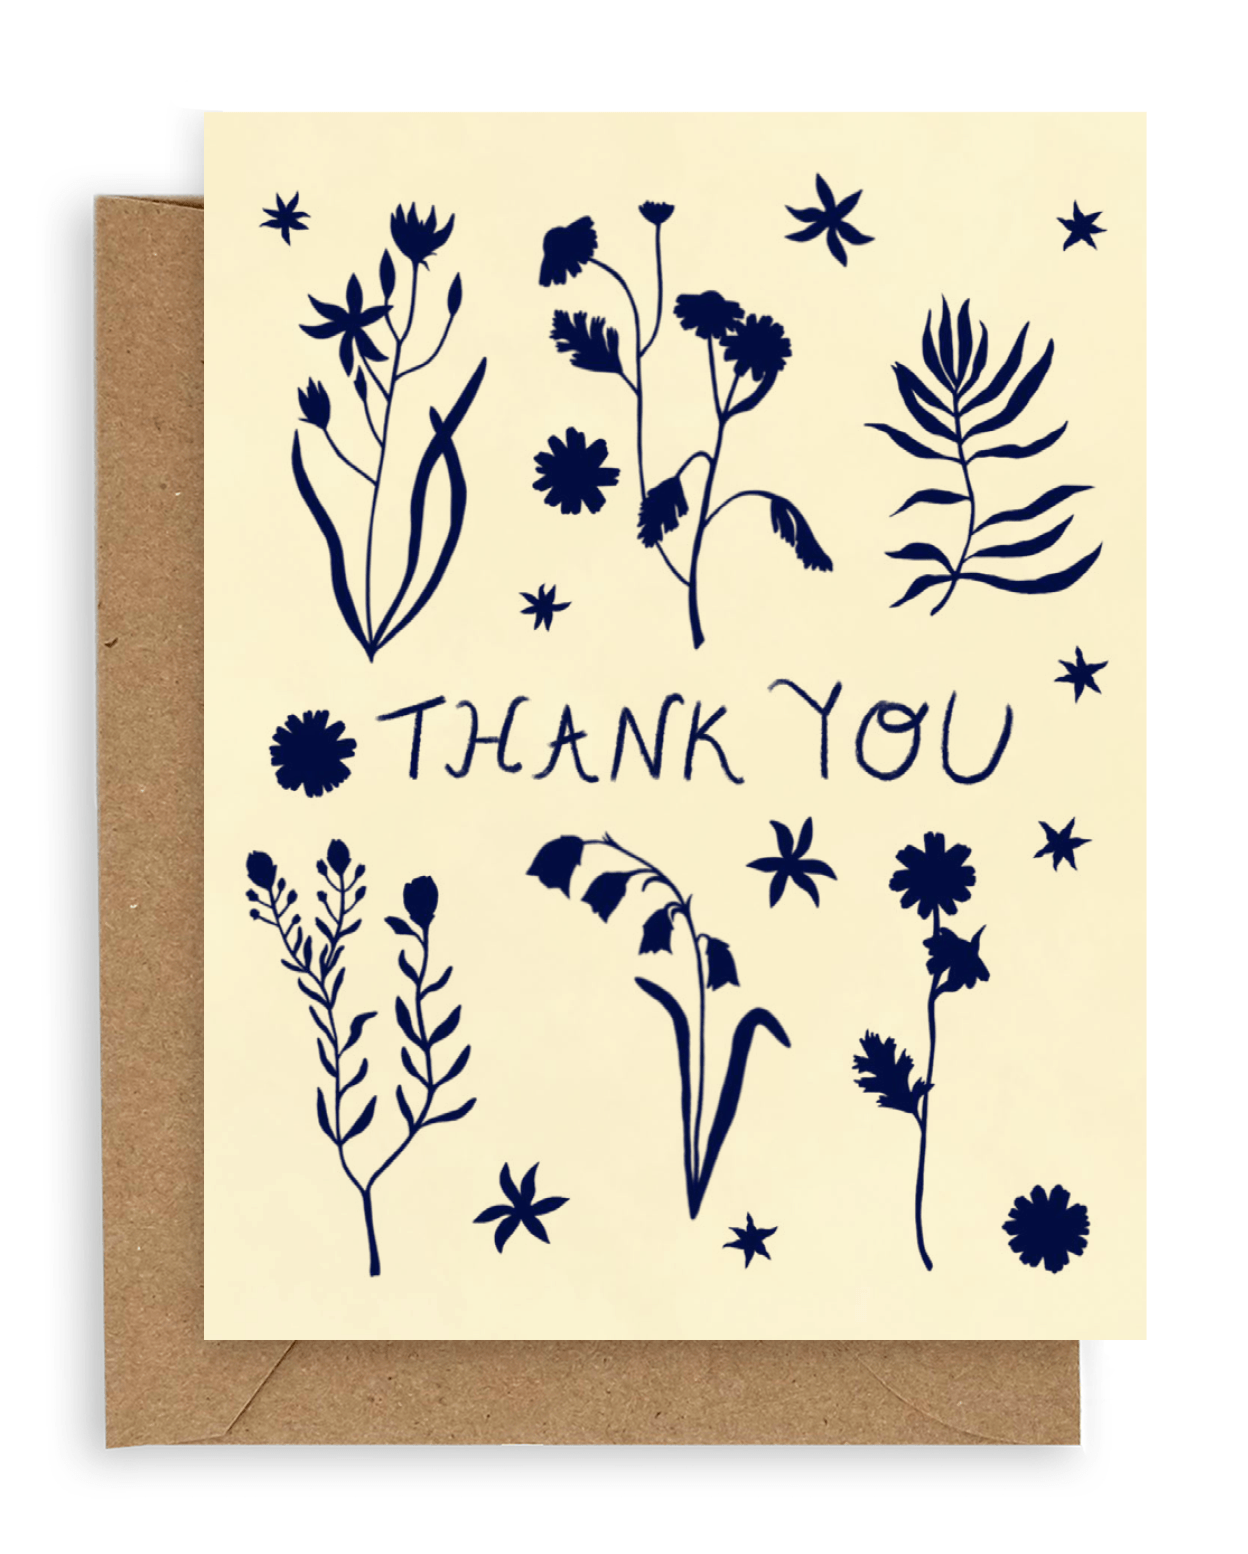 Our forest flowers design, with three stems above and three below vertically  with the words &quot;Thank You&quot; in the middle all in Navy Blue. Printed on a cream colored background. Shown with Kraft envelope. 